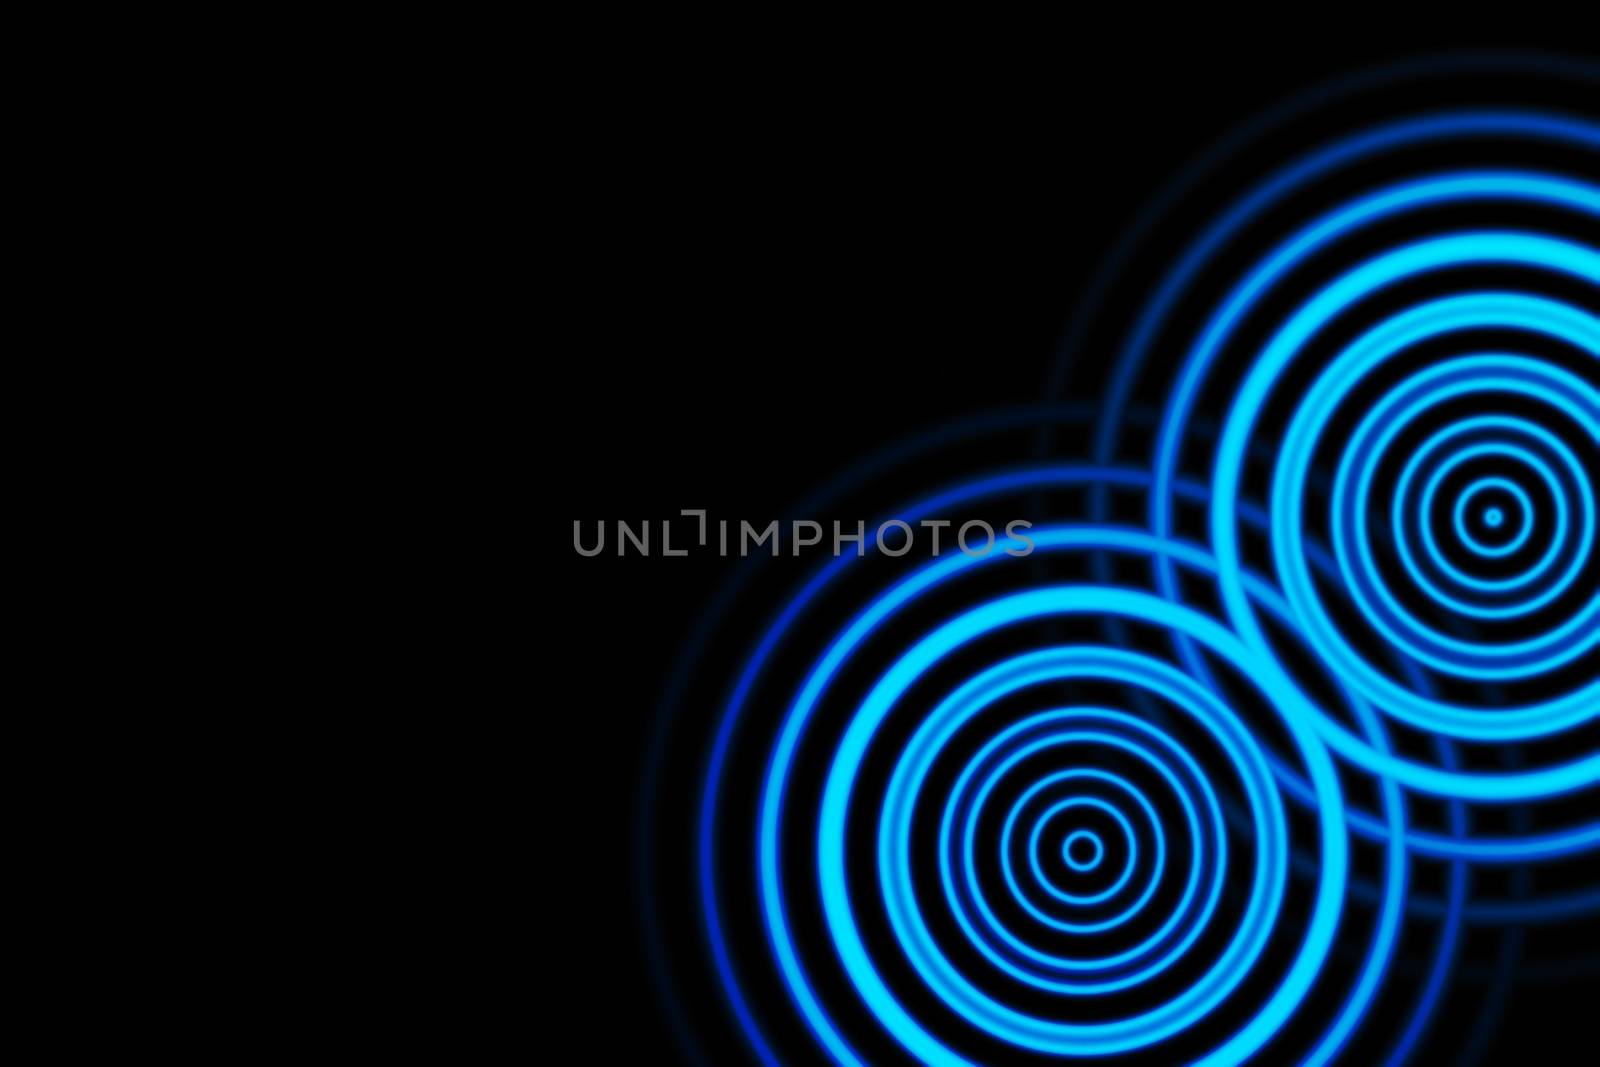 Sound waves oscillating blue with circle spin, abstract backgrou by mouu007